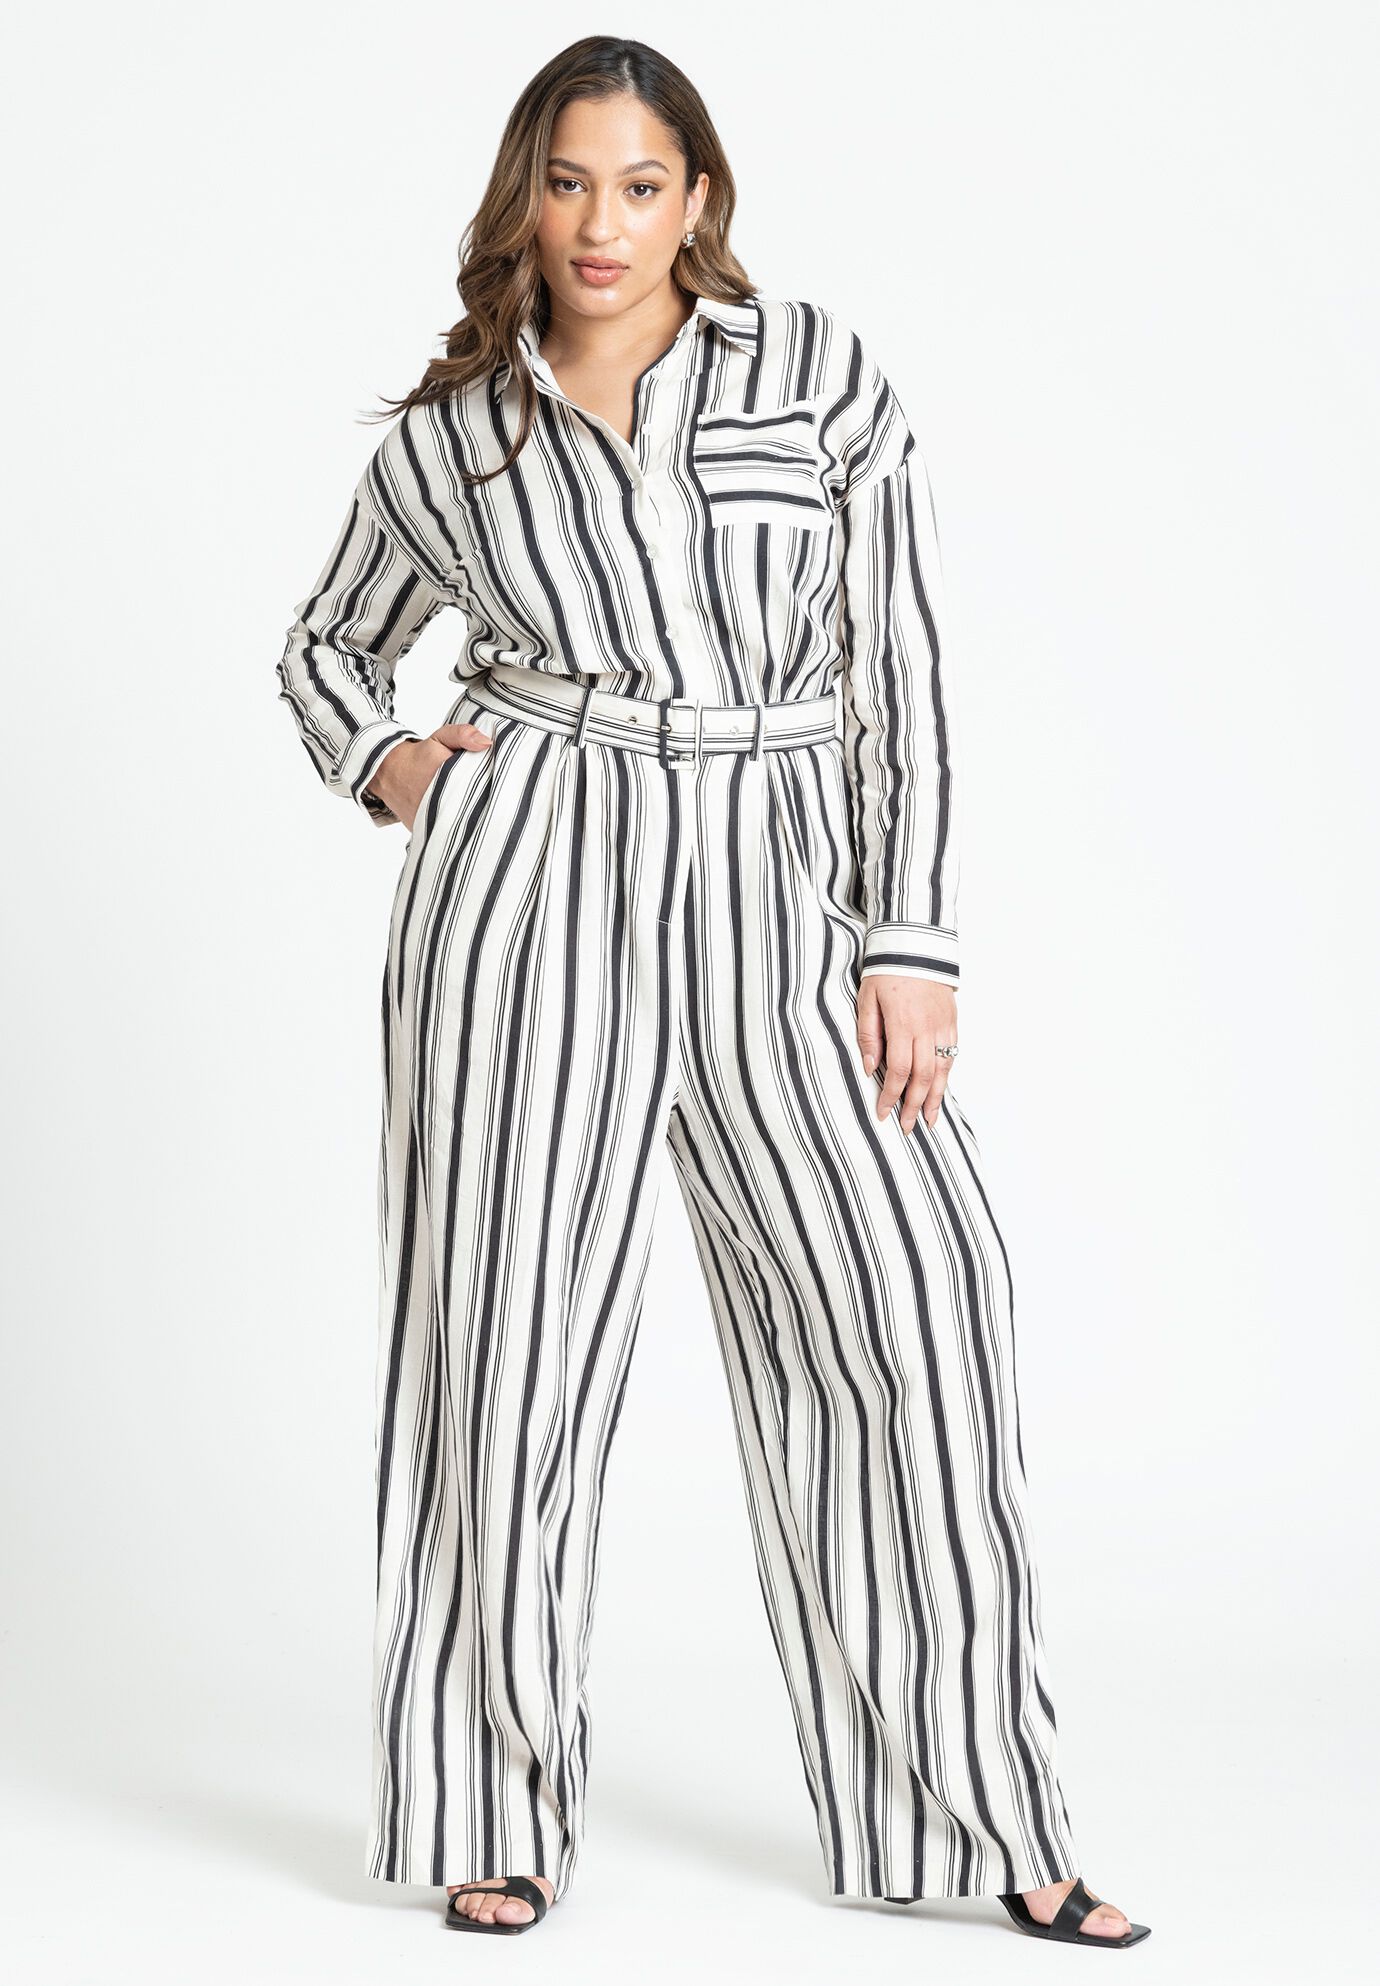 Plus Size Long Sleeves Dropped Shoulder Pleated Pocketed Belted Collared Striped Print Floor Length Jumpsuit